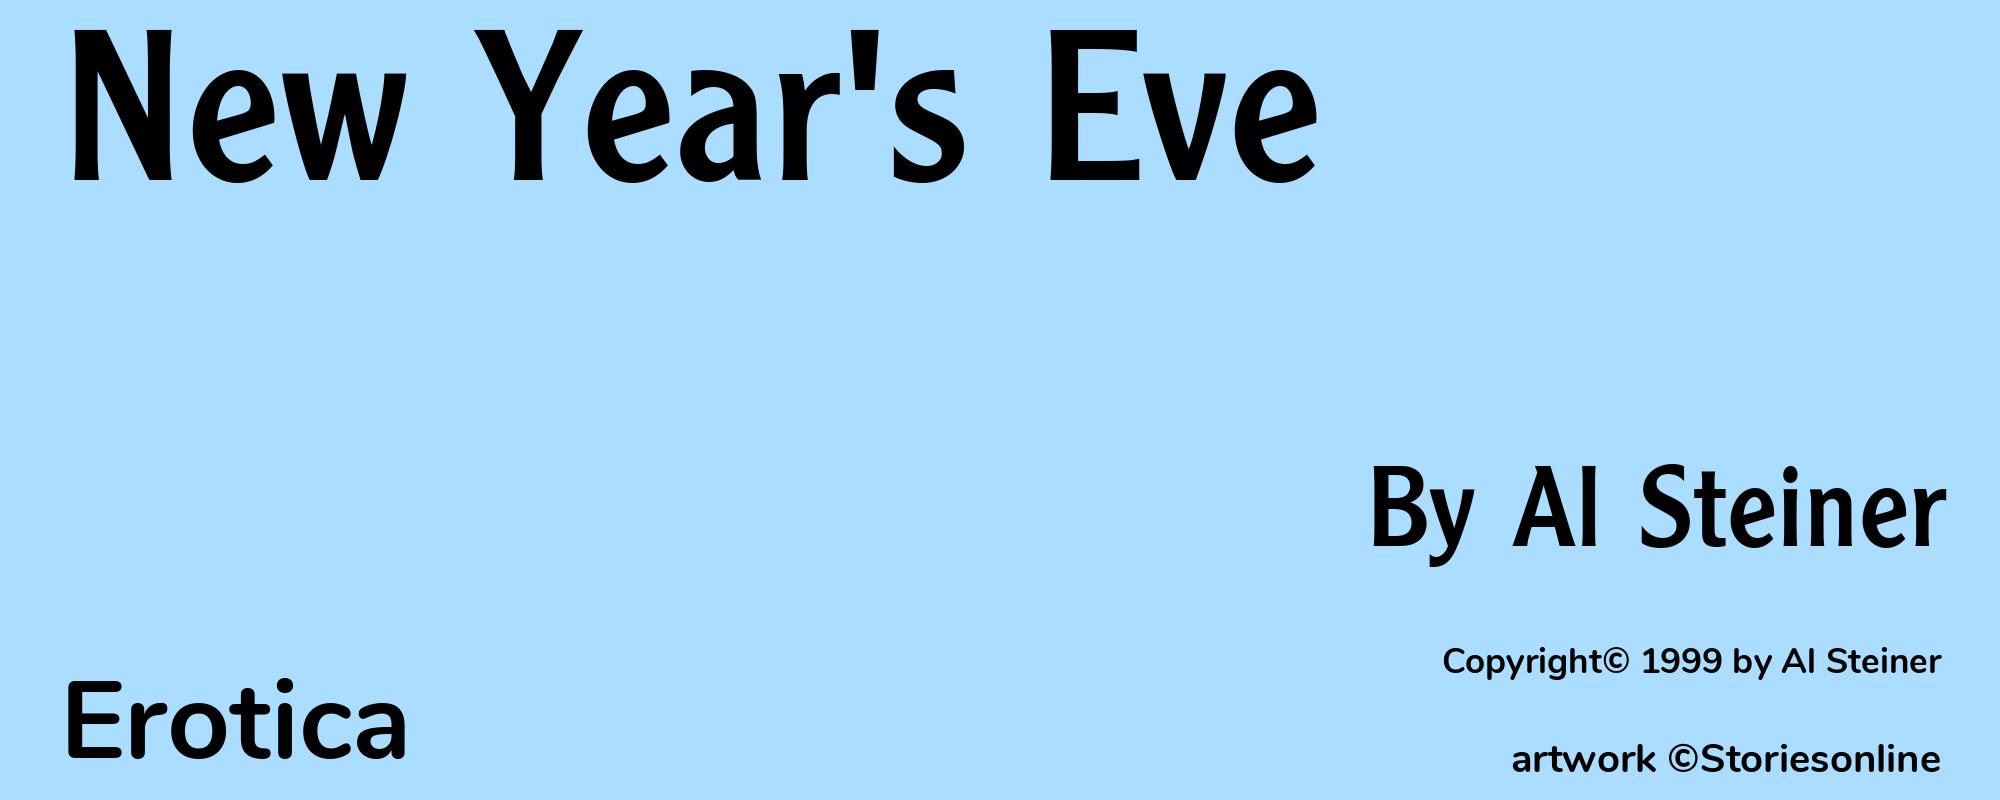 New Year's Eve - Cover